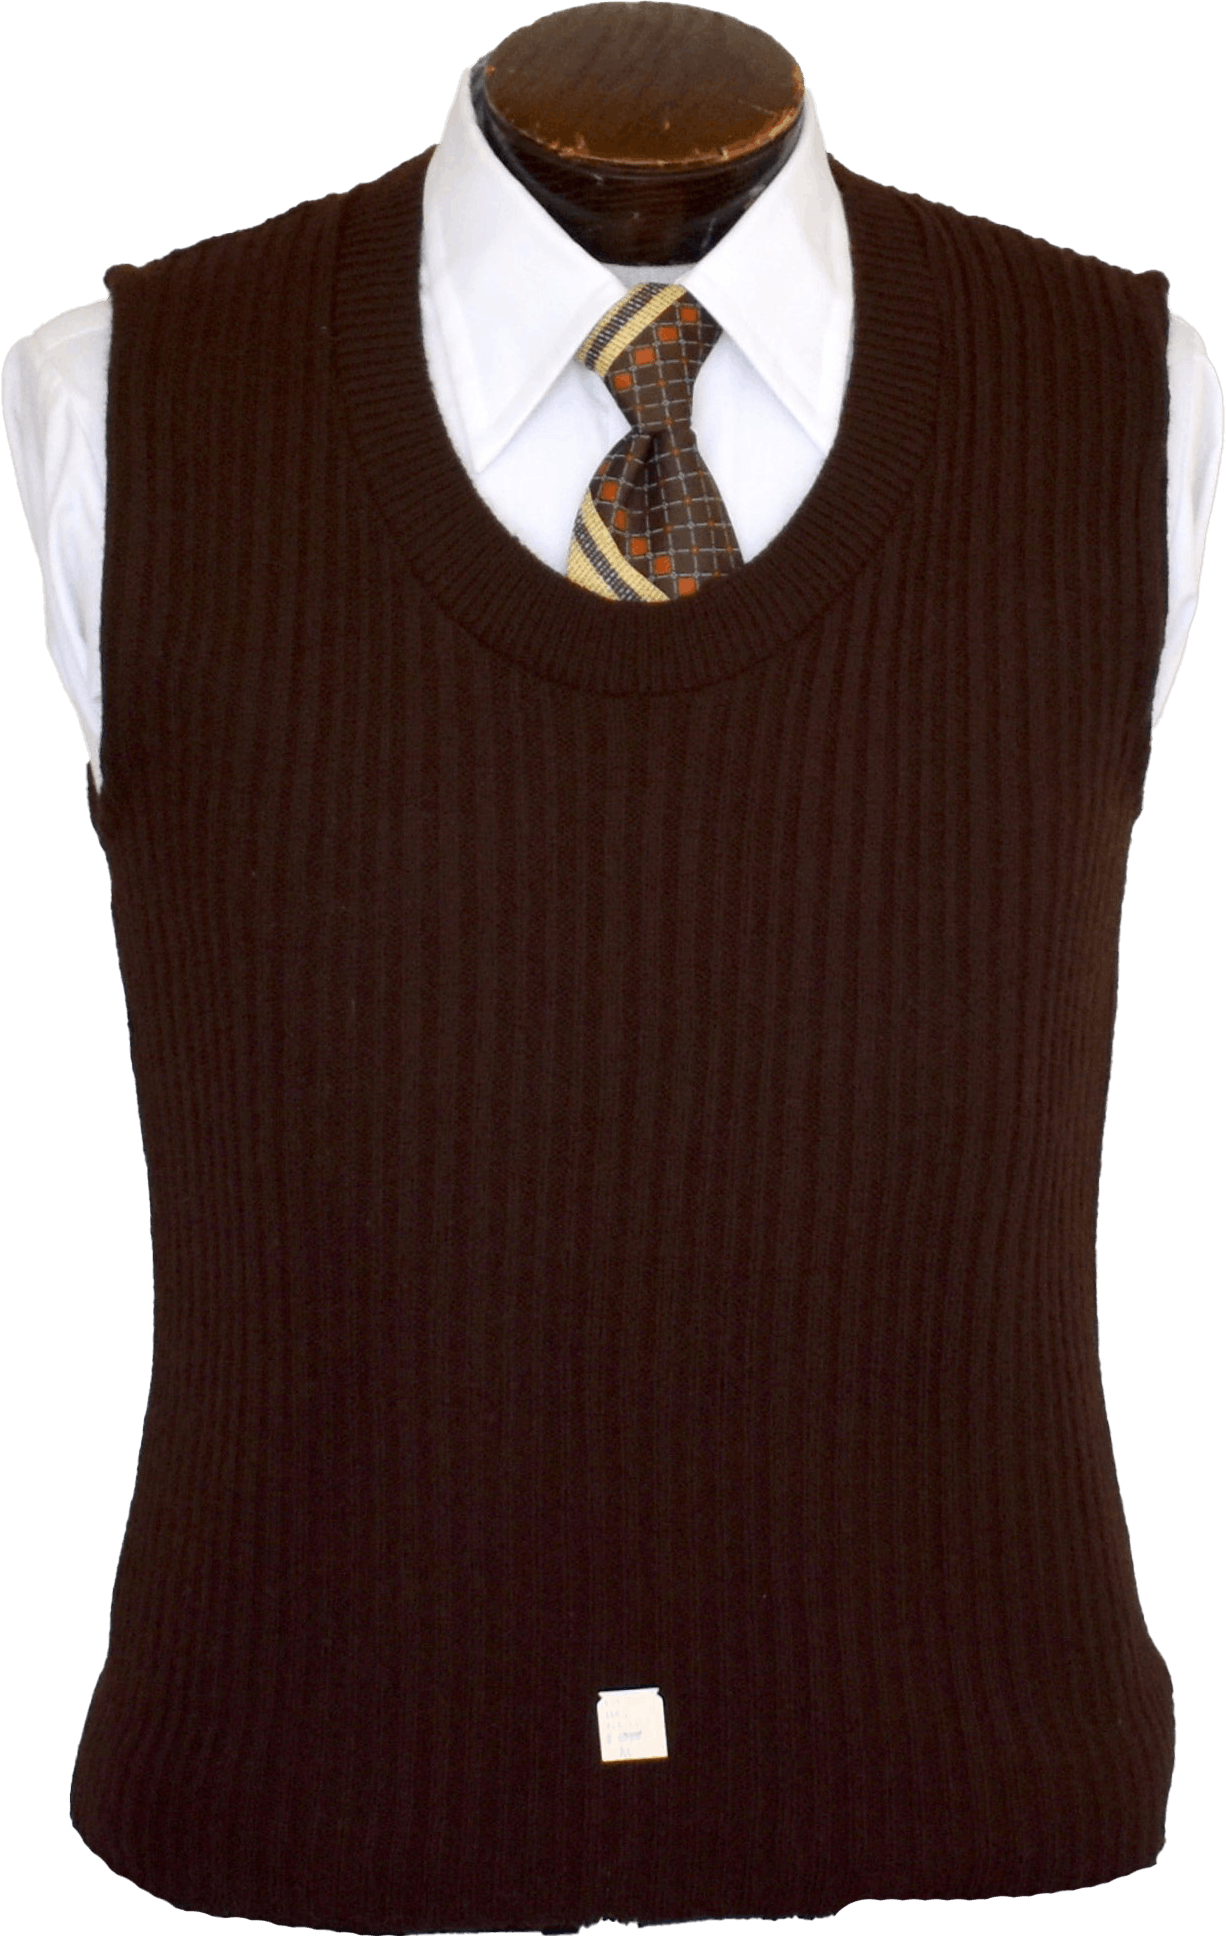 Vintage 70s Round Neck Rib Knit Sweater Vest By Jcpenney Towncraft ...